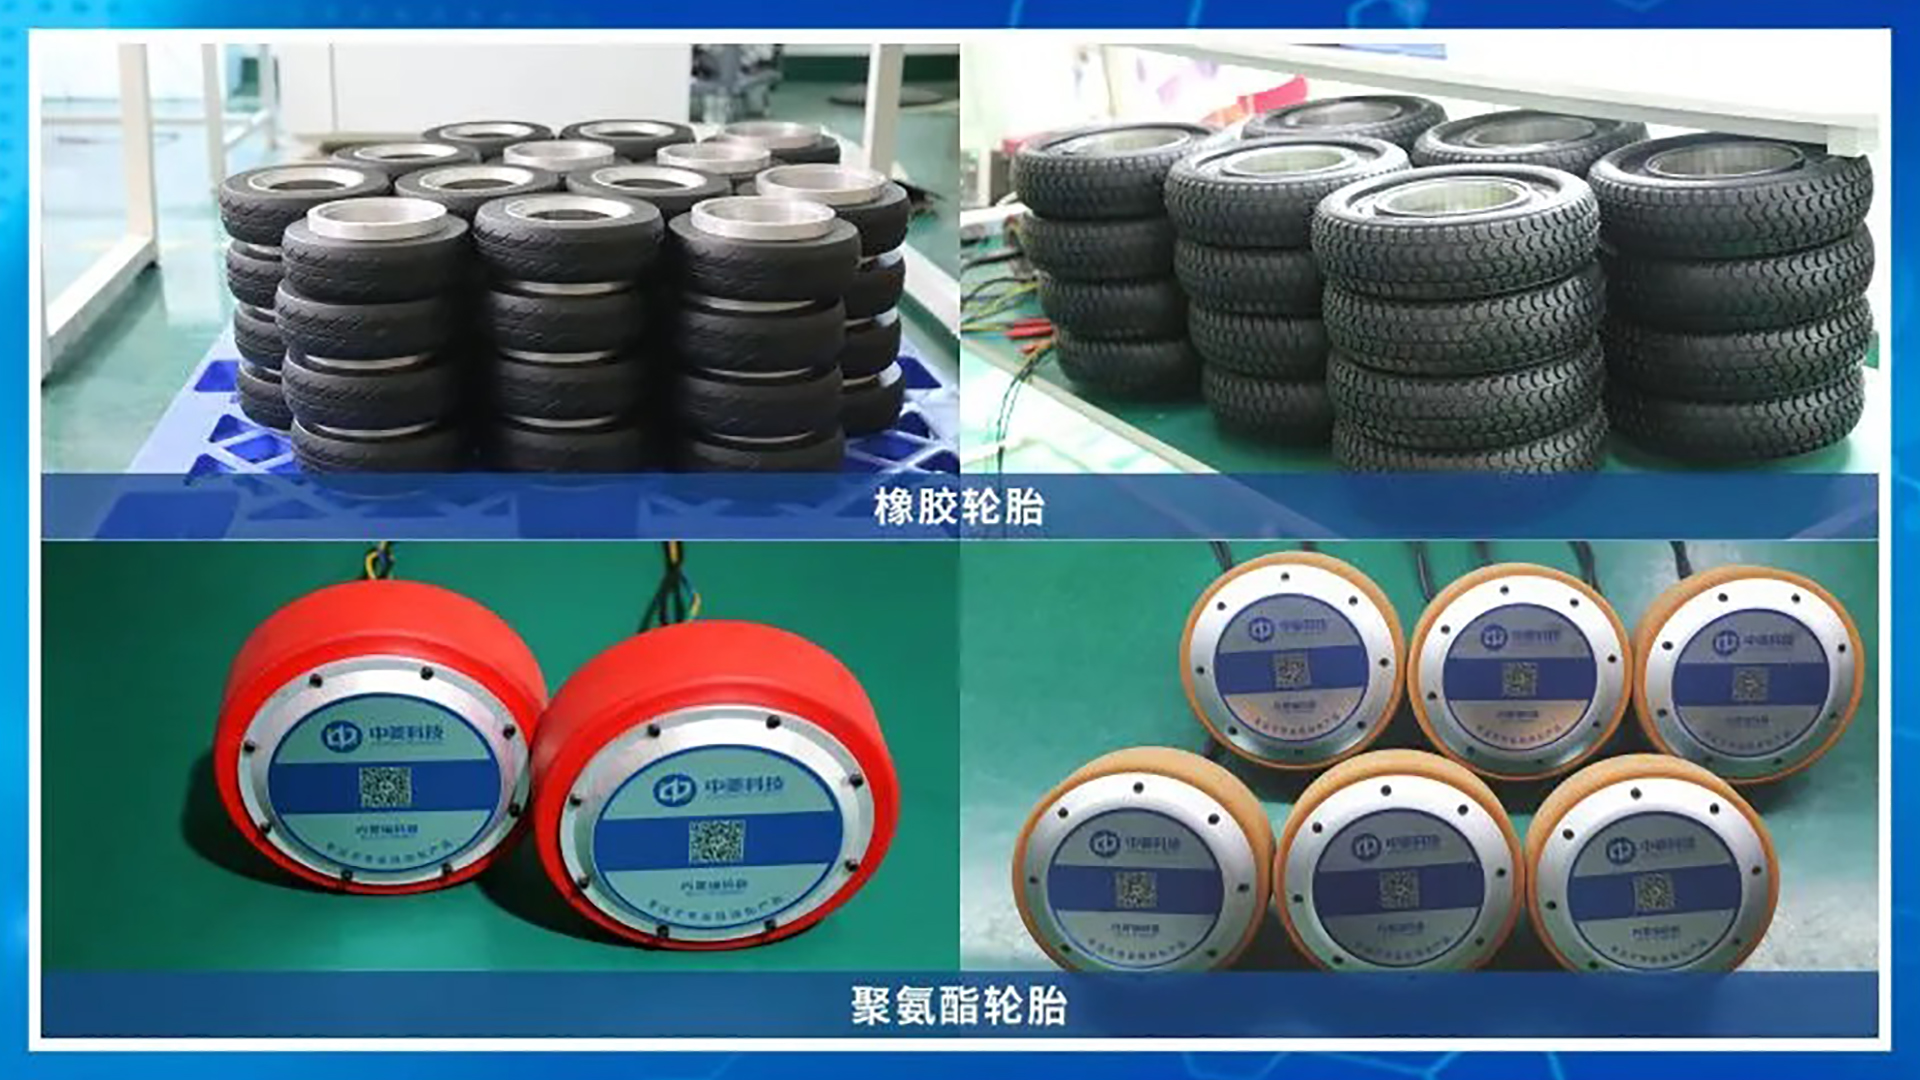 About rubber tires